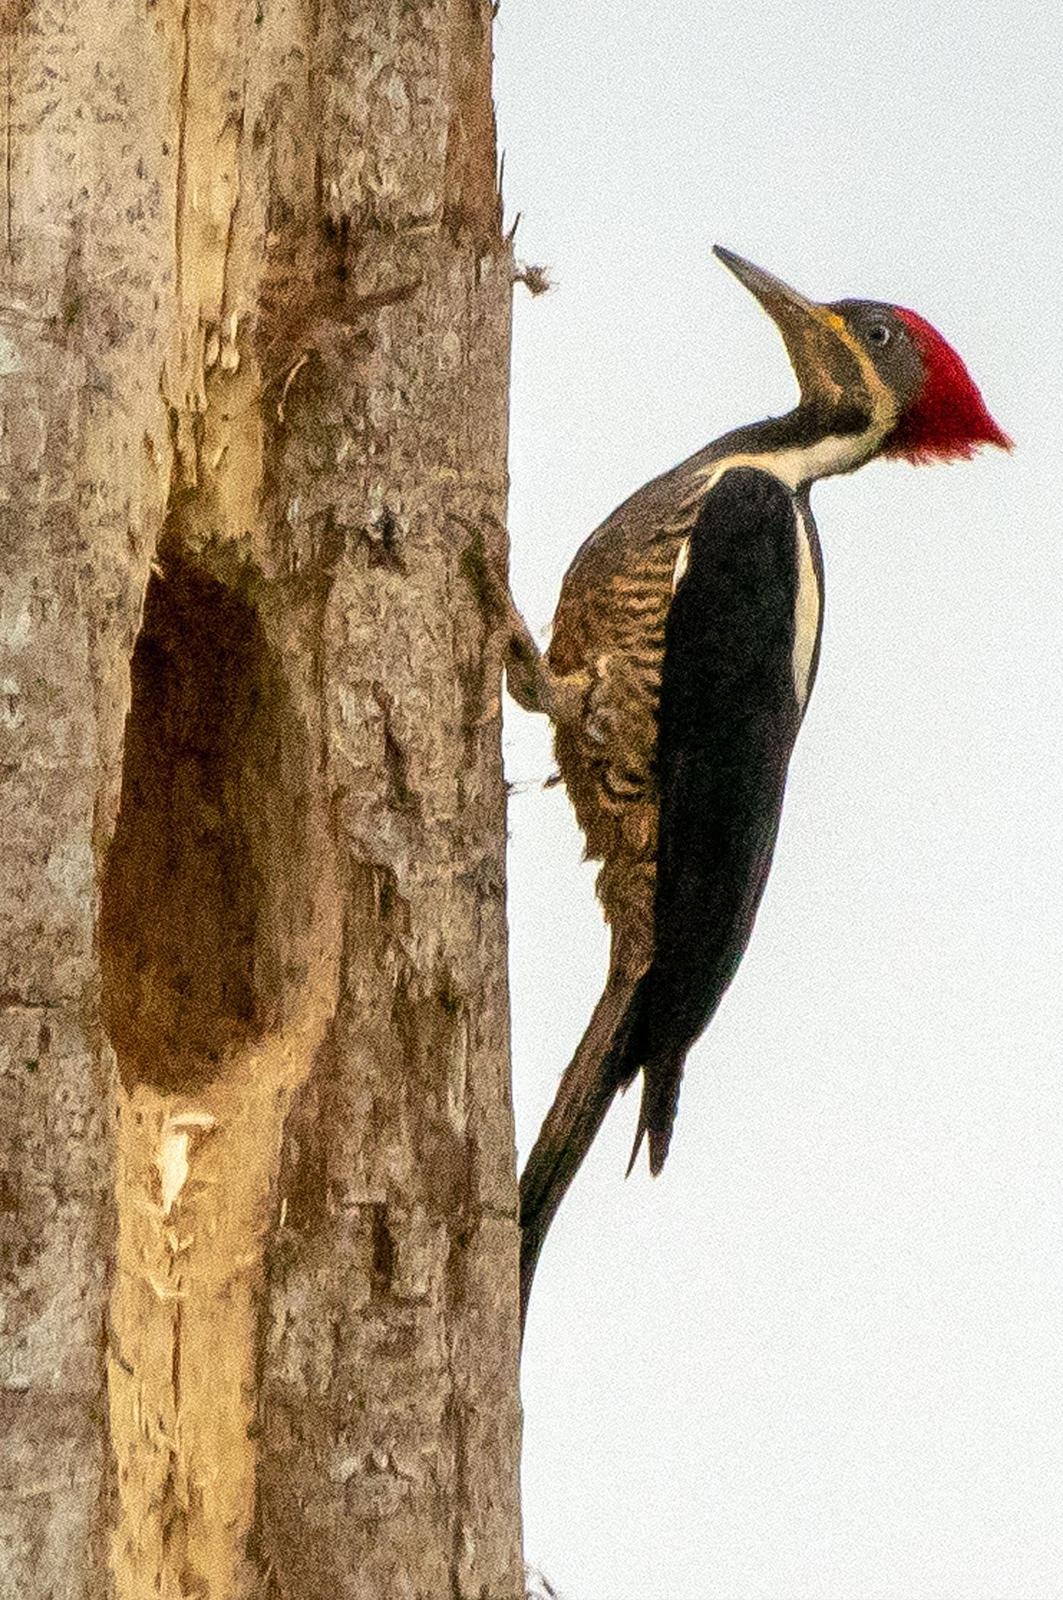 Lineated Woodpecker (Lineated) Photo by Phil Kahler